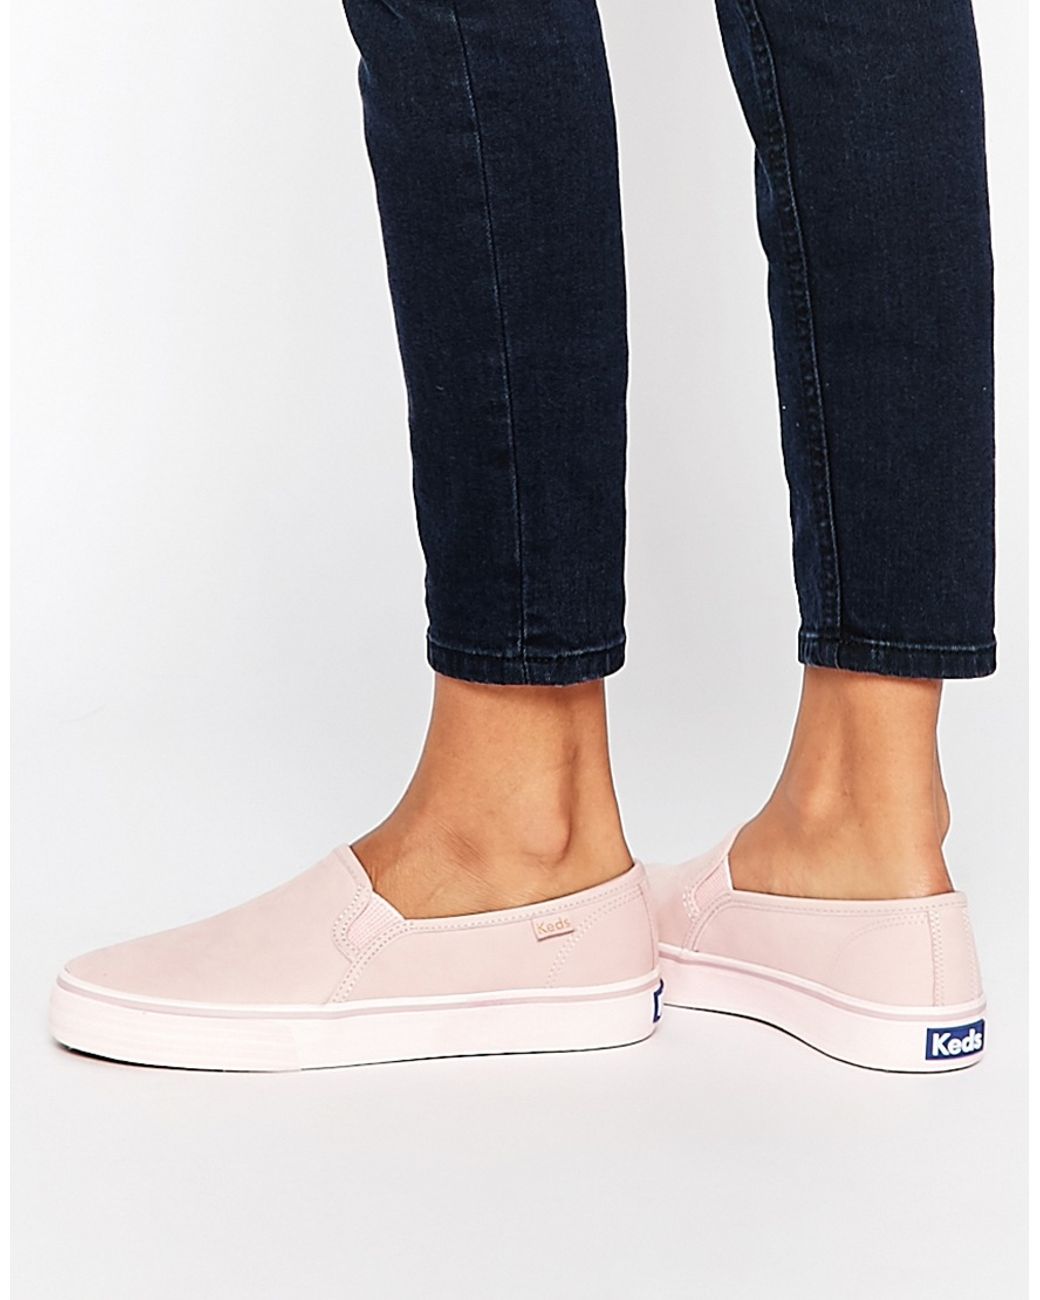 Keds Double Decker Washed Leather Pale Pink Slip On Plimsoll Trainers |  Lyst UK